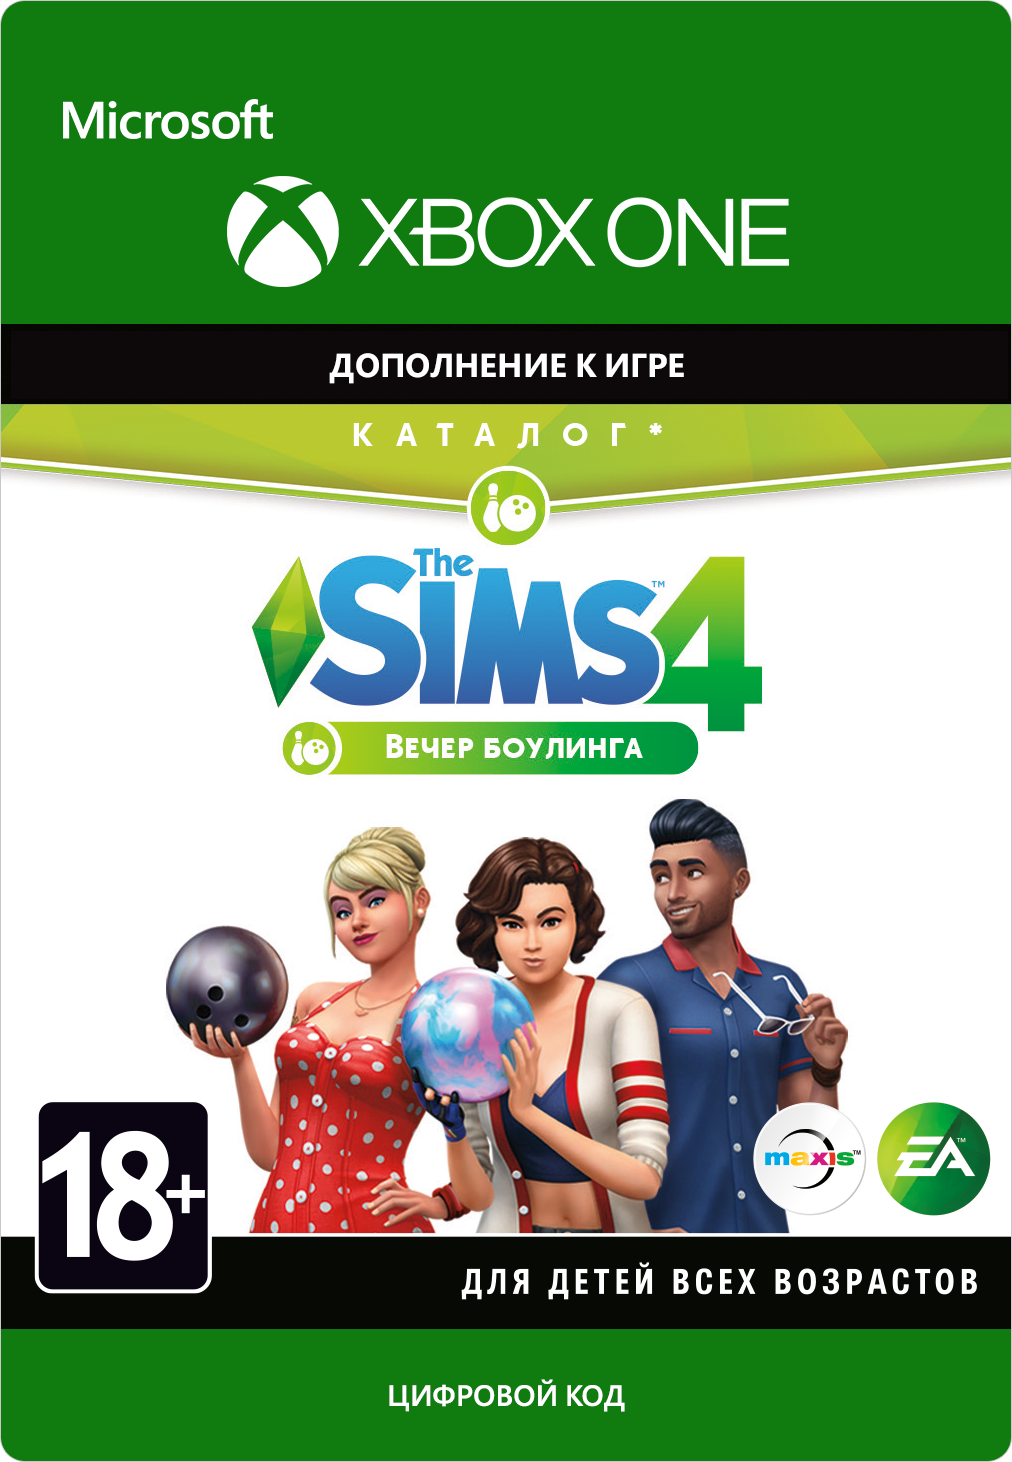 the sims 4: bowling night stuf. дополнение [xbox one